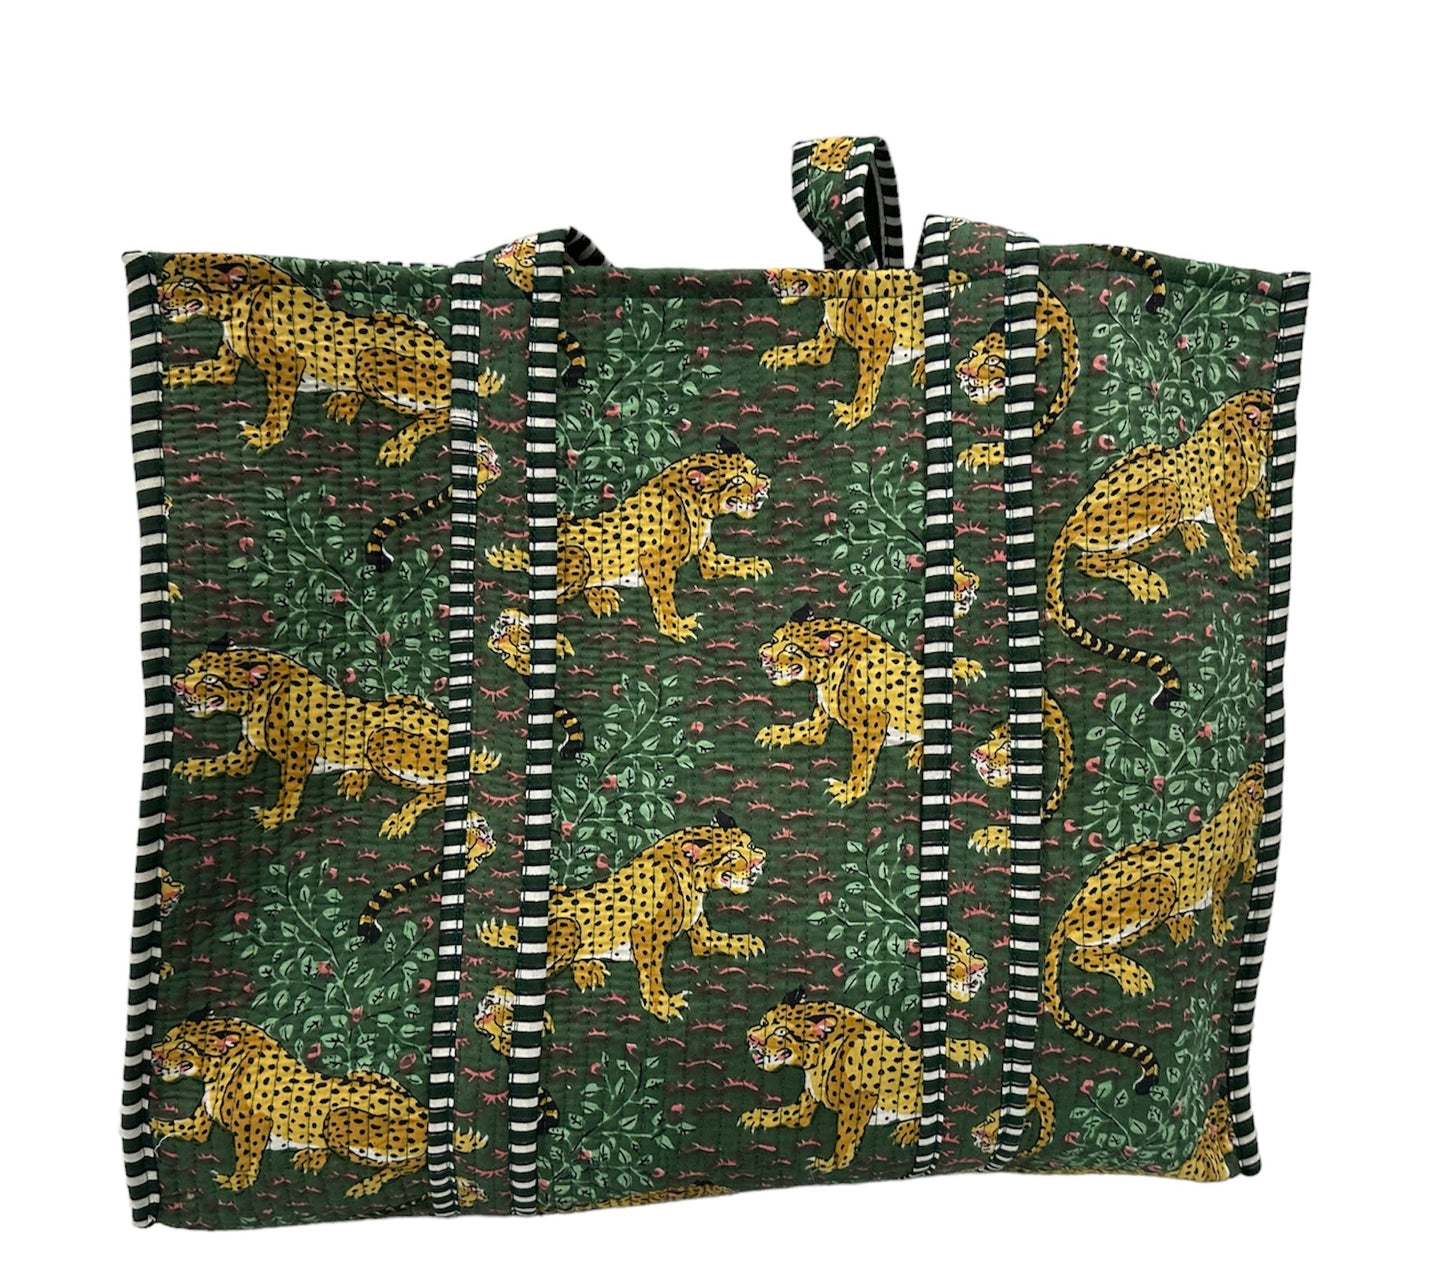 The Ultimate Leopard Tote